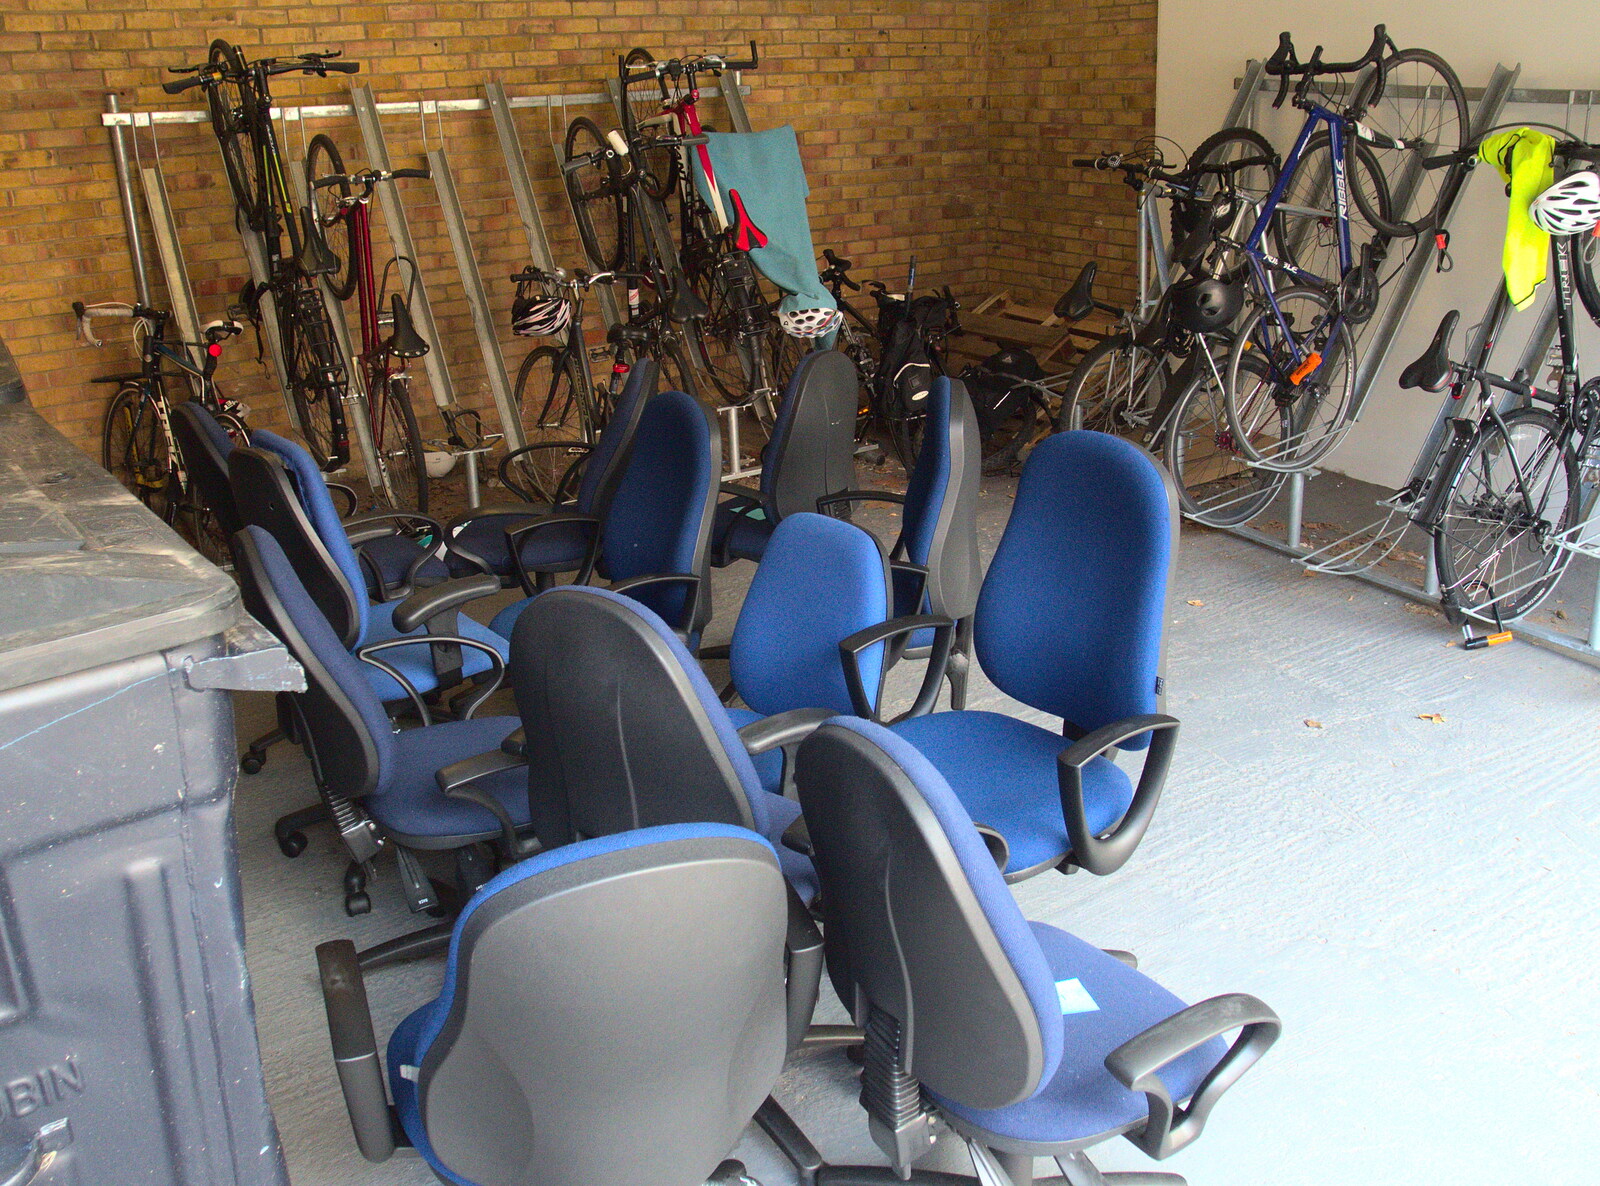 Old office chairs in the bike shed at work from New Railway and a Trip to Ikea, Ipswich and Thurrock - 19th September 2014